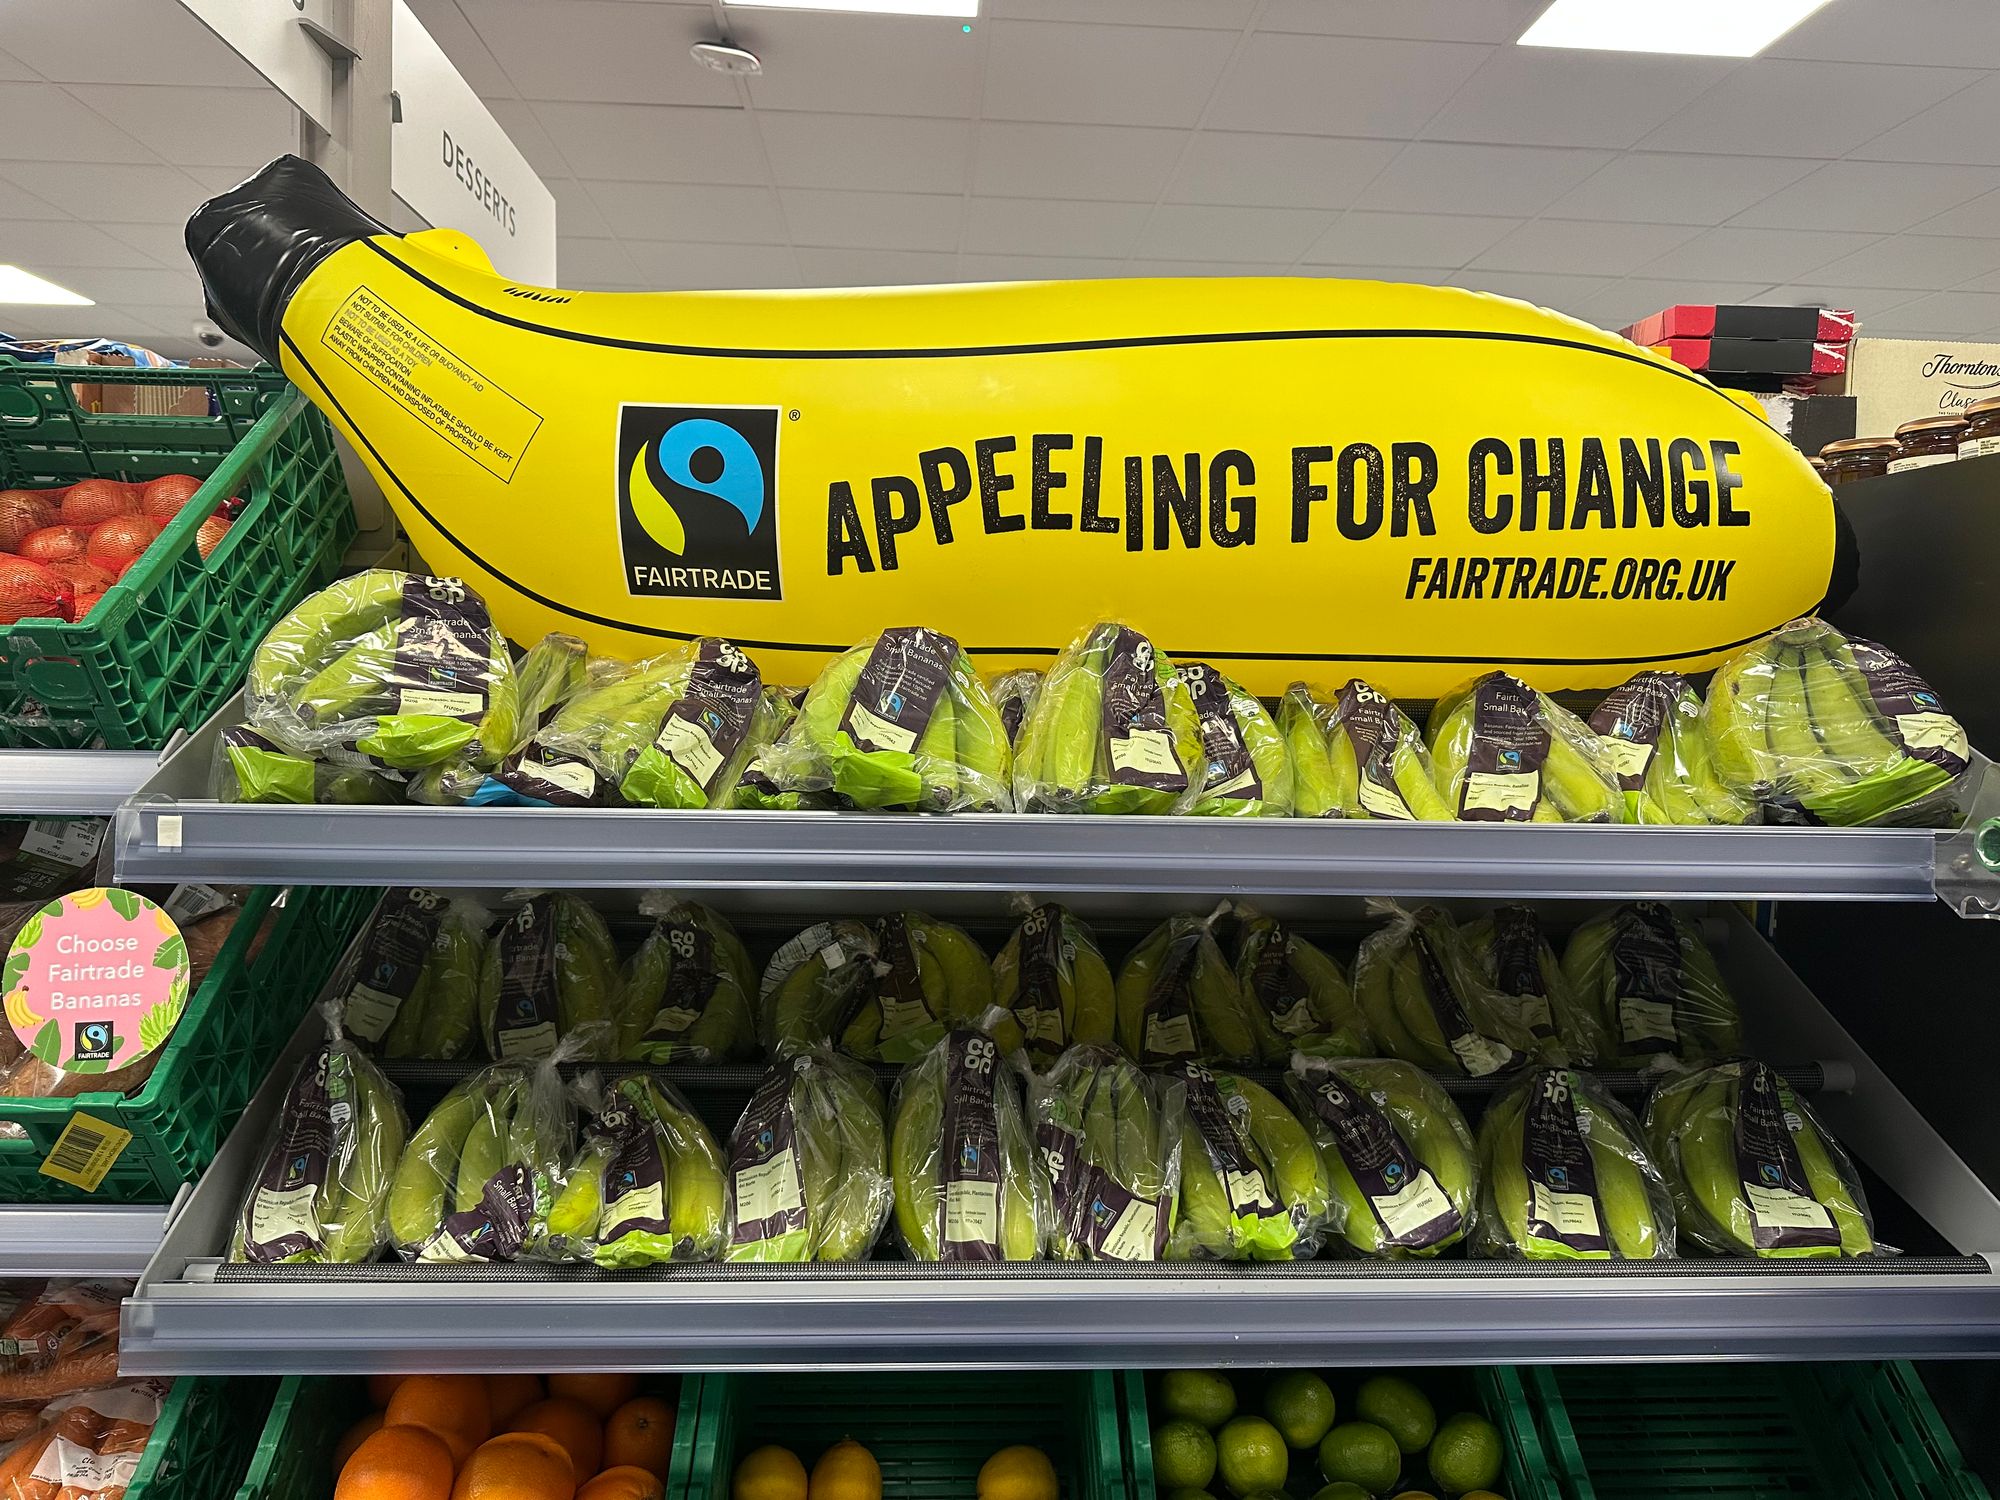 An Apeeling Fairtrade Fortnight was had in the West Midlands